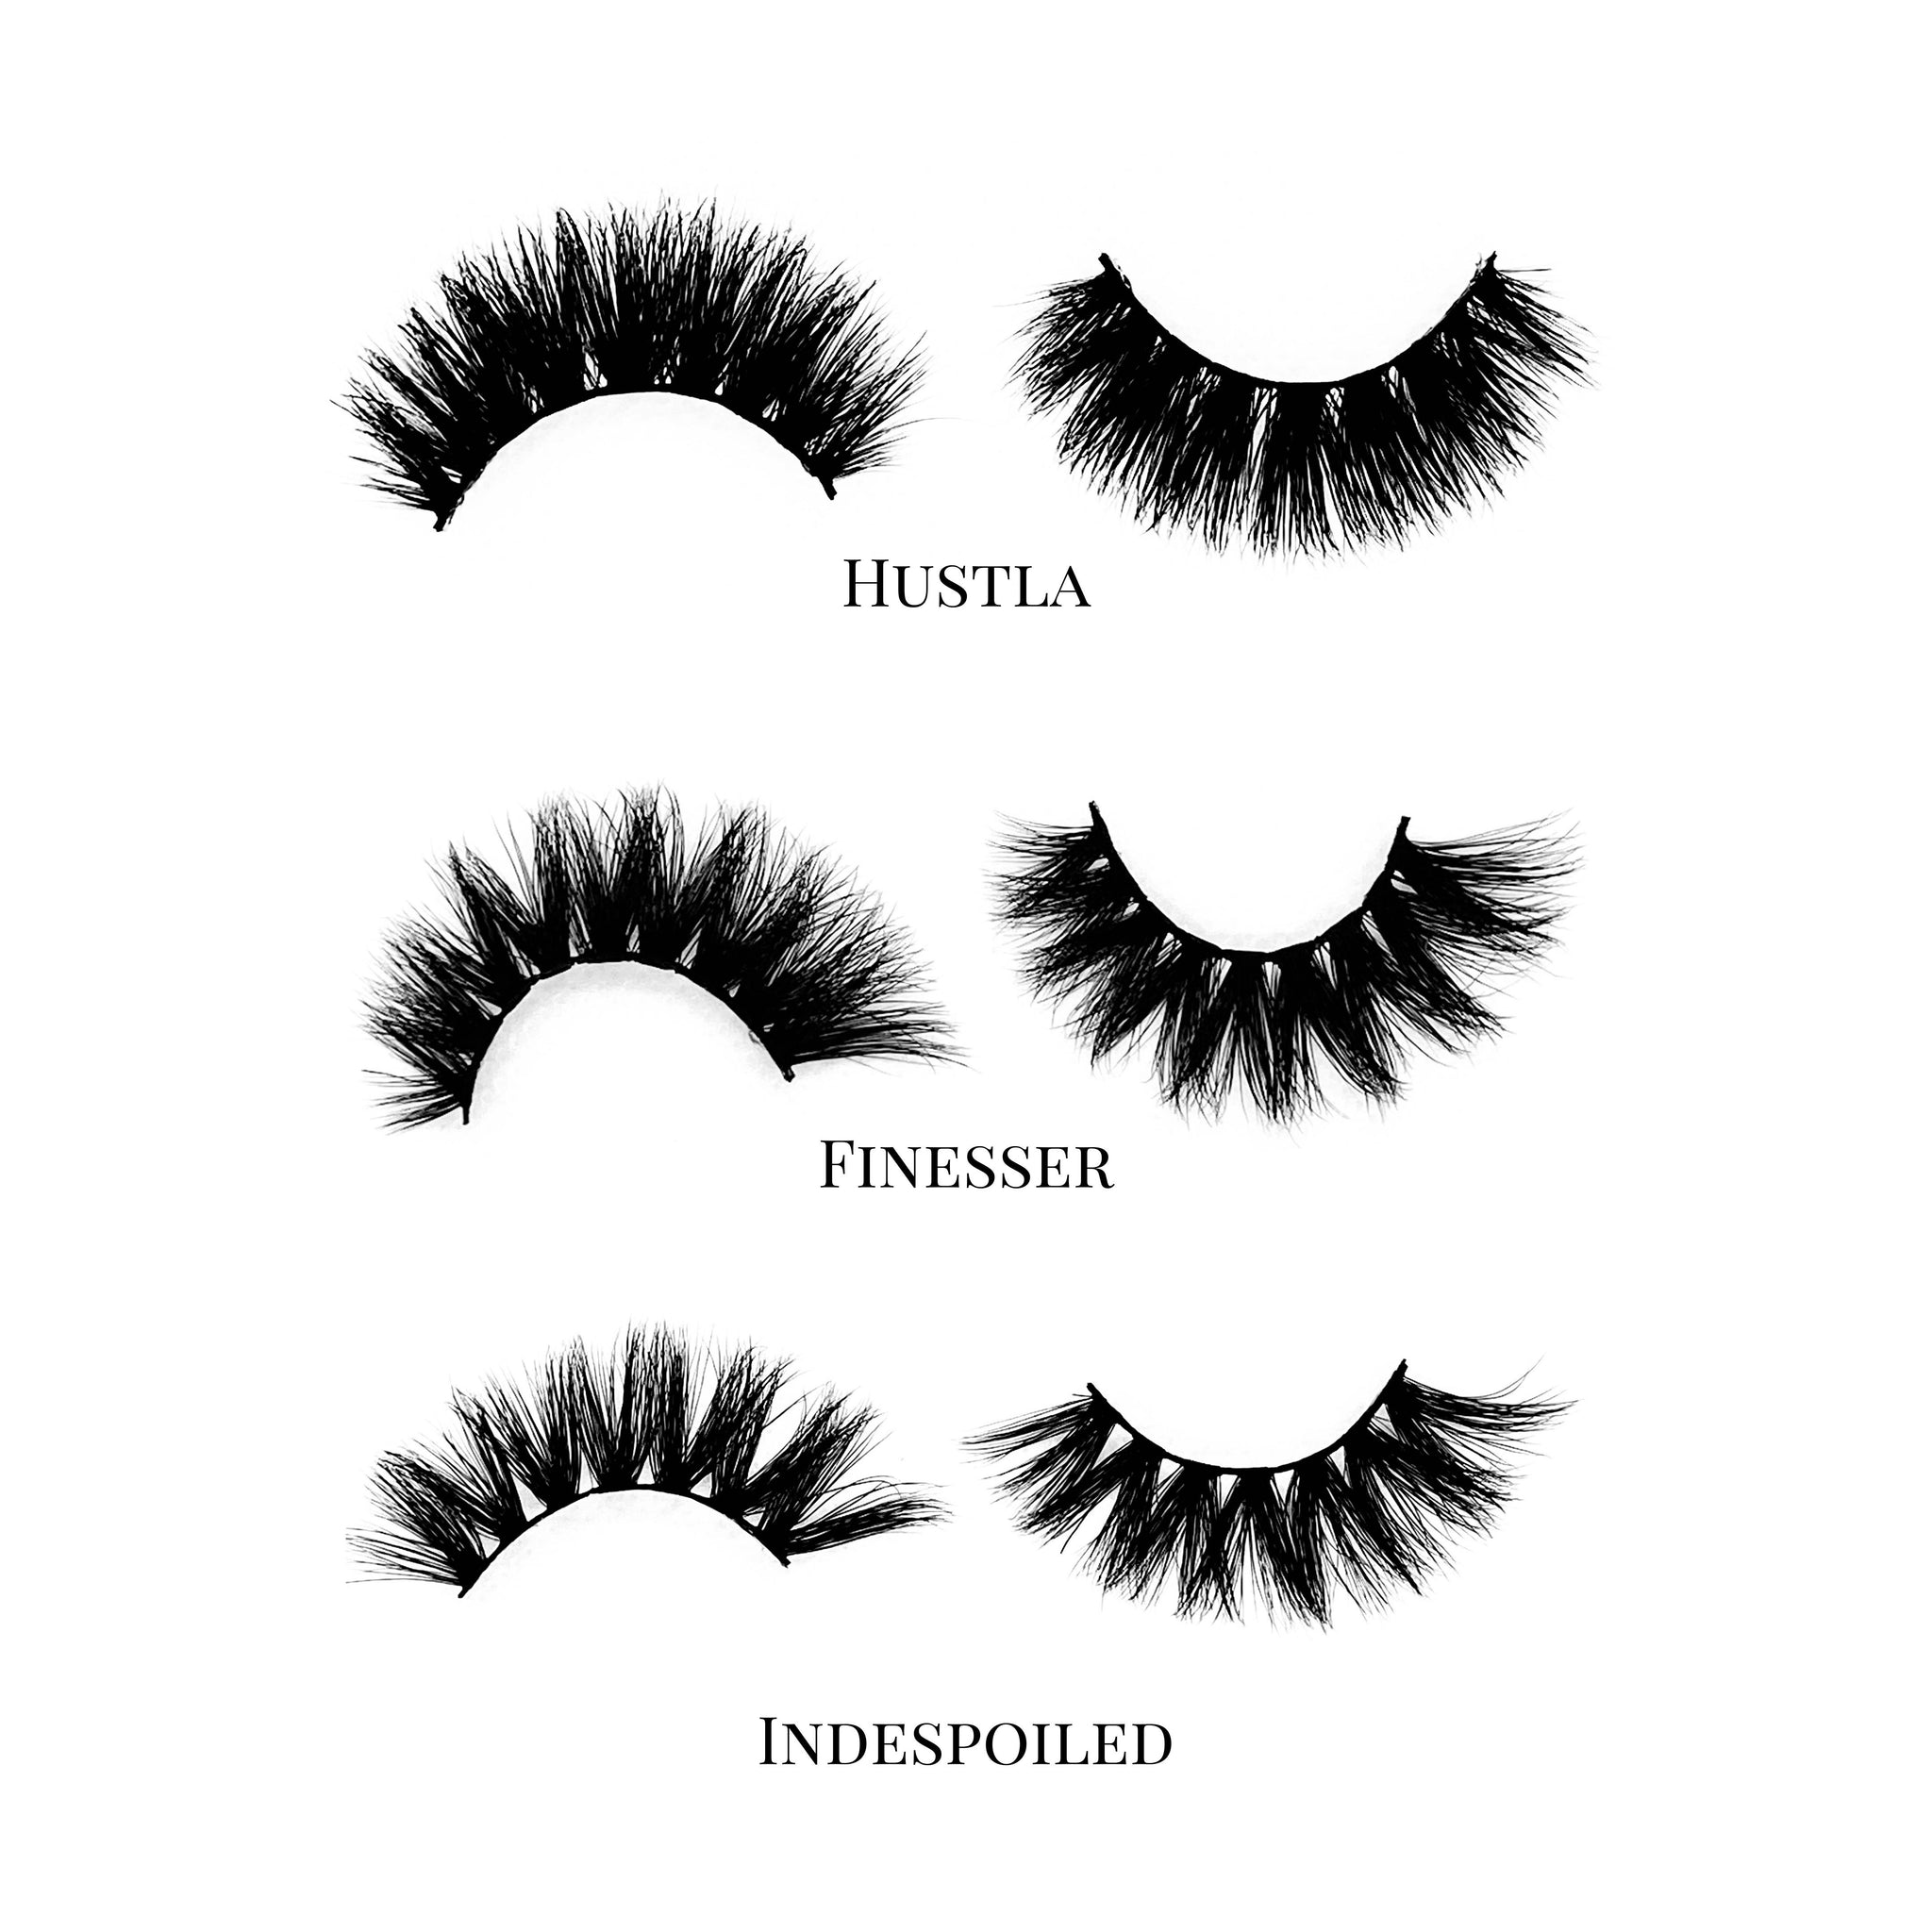 Boss Up (3-Pack)-High Volume-This set includes (3) High Volume Mink lashes: Hustla Finesser Indespoiled Description Handmade, Cruelty-Free, Wear up to 30x Material: 100% Mink Band: Black Cotton Band Volume: High Volume Style: Dramatic, Long, Wispy, Cat-eye, Open-eye To Use: Measure and size your lashes by placing the false lash against your lash line where your natural lashes start. Using Mini Scissors, cut off the excess lash band length from the outer corners to ensure they fit properly. Apply